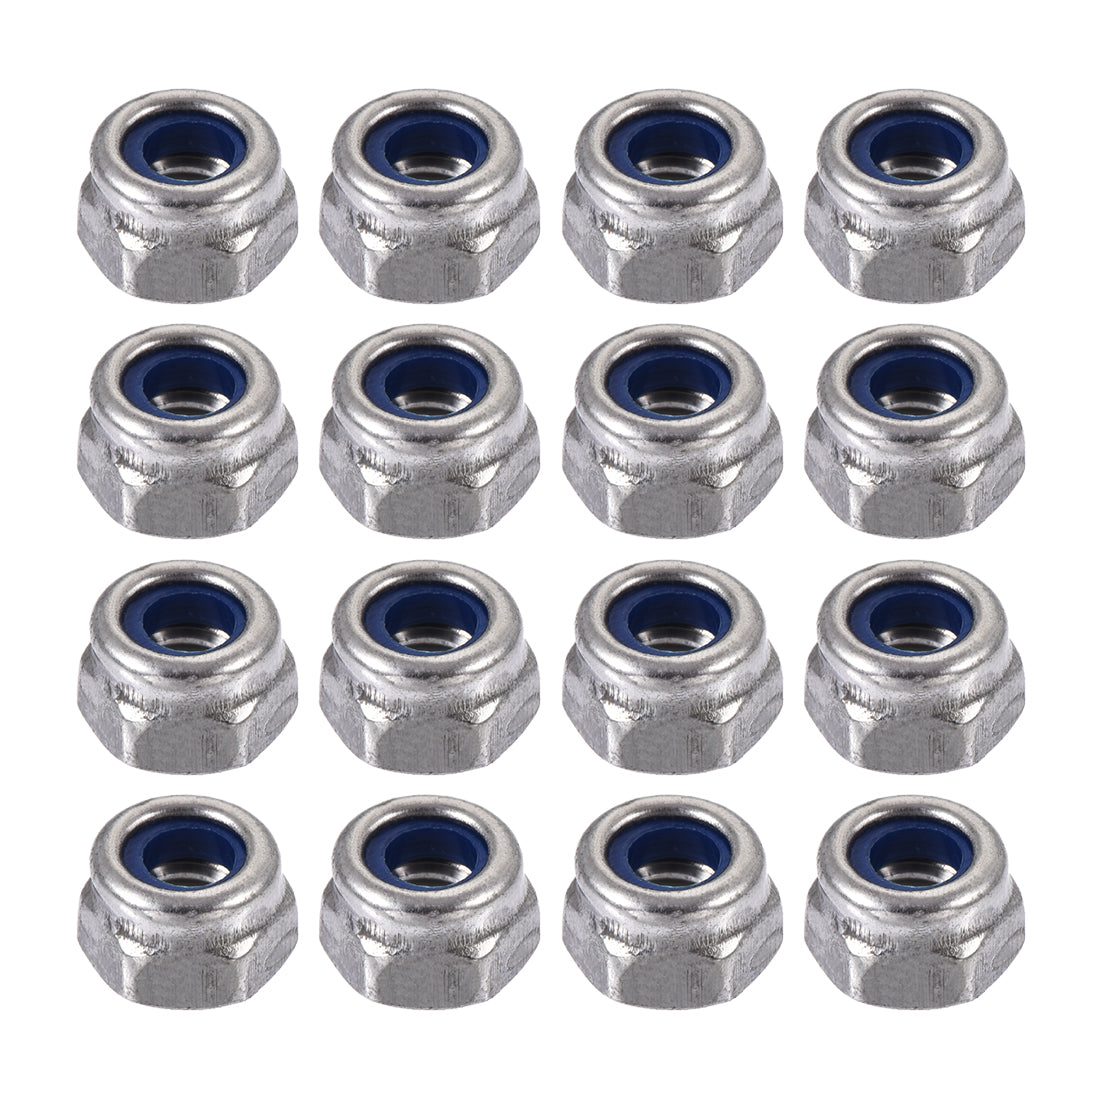 uxcell Uxcell 100 Pcs 304HC A2 70 A2-70 Stainless Steel Hex Nylon Nylon Lock Nut M4